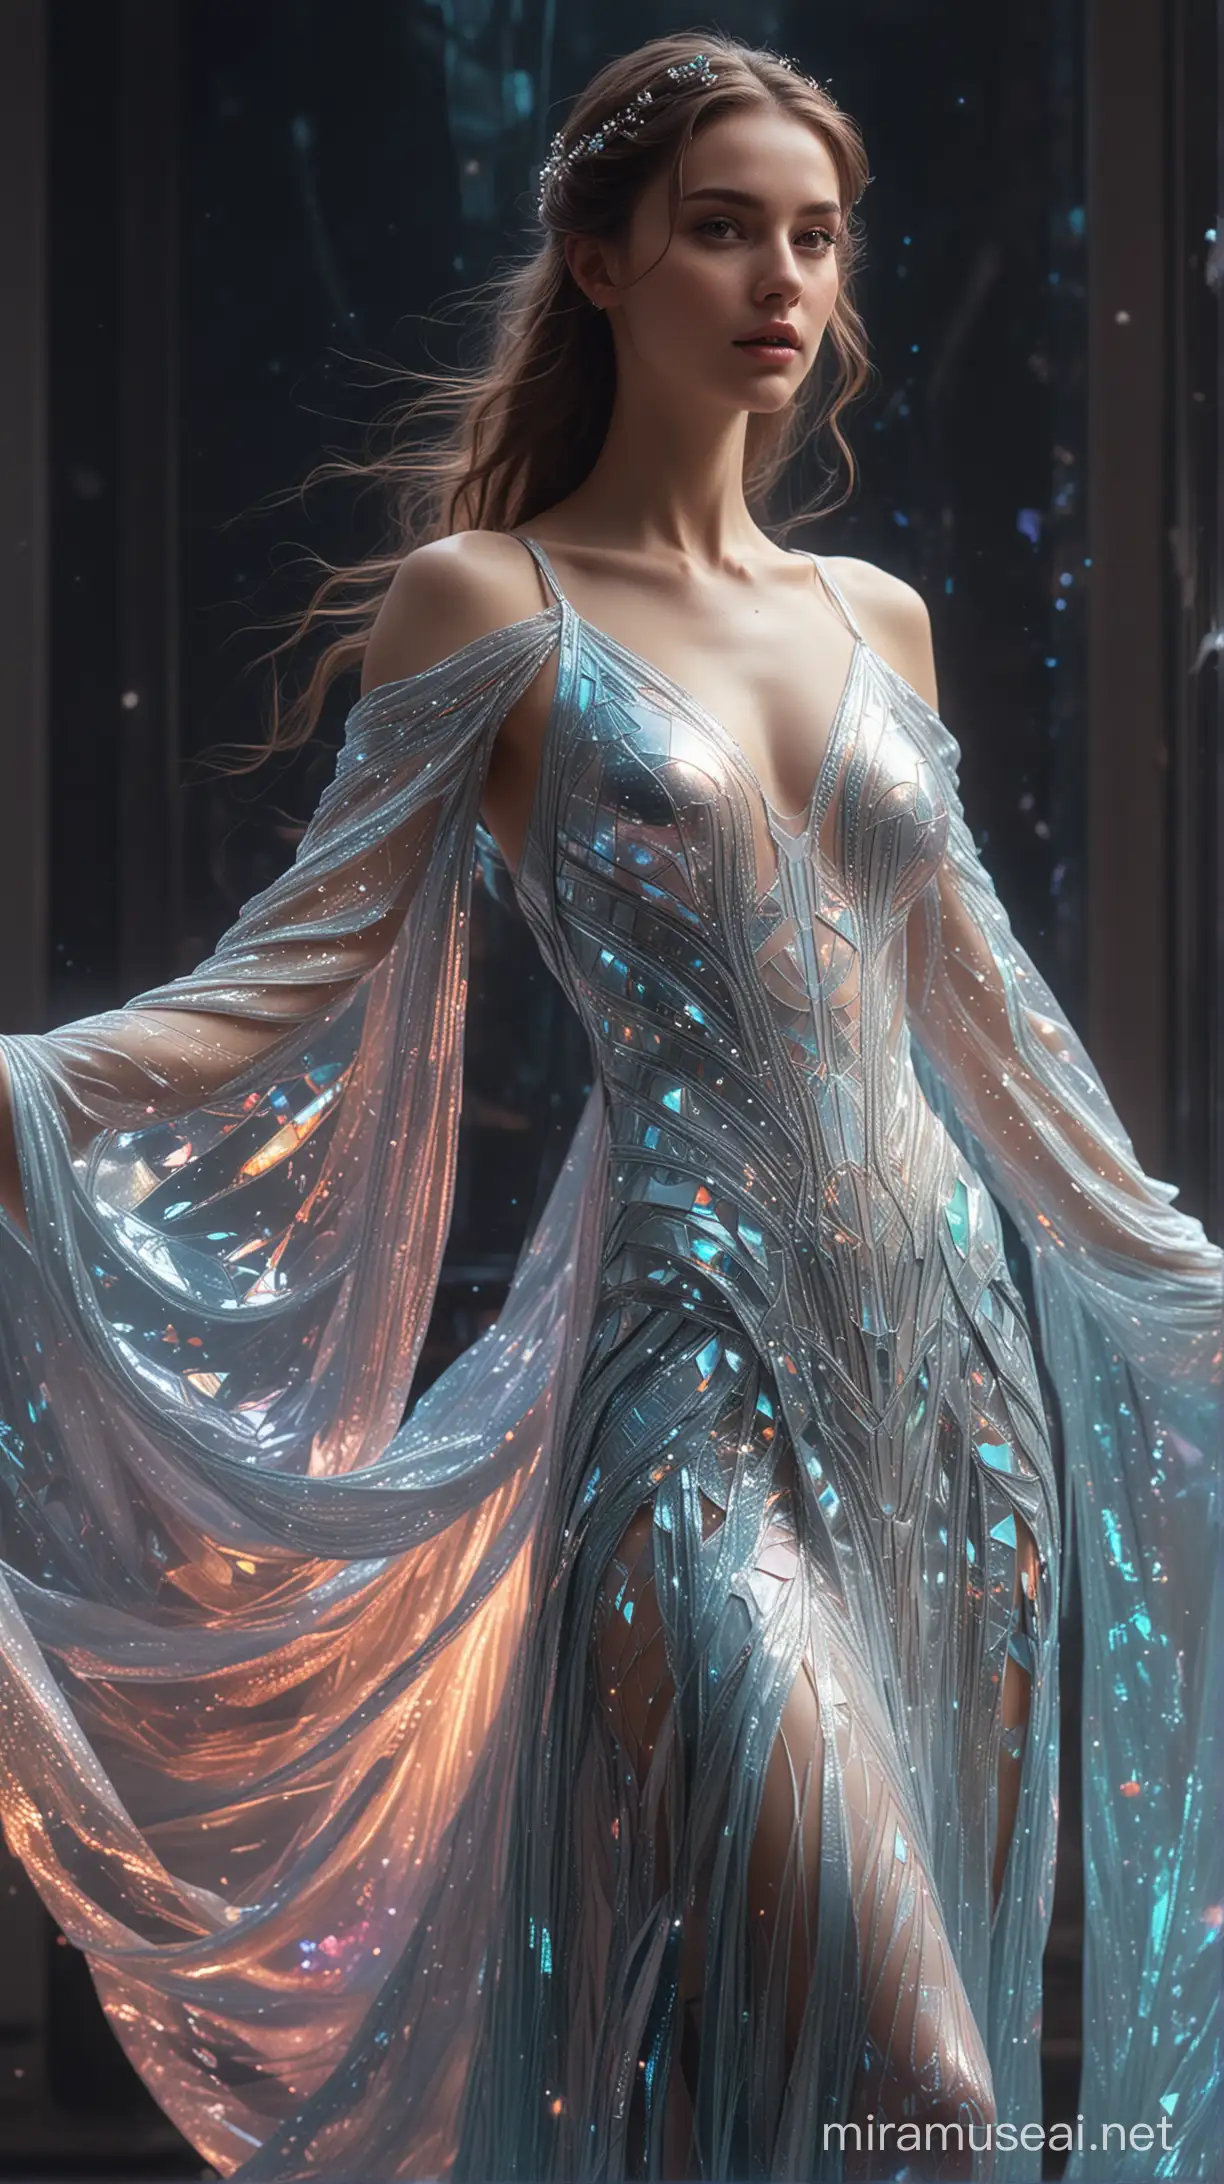 In a futuristic world, a holographic gown shimmers in an array of ethereal hues, casting a mesmerizing glow. This exquisite piece is showcased in a digital painting, capturing its translucent beauty and intricate details with stunning realism. The intricate patterns and holographic textures create a sense of depth and movement, elevating the image to an otherworldly level of artistry. The high resolution and vivid colors make every pixel of this creation a masterpiece of modern digital design.